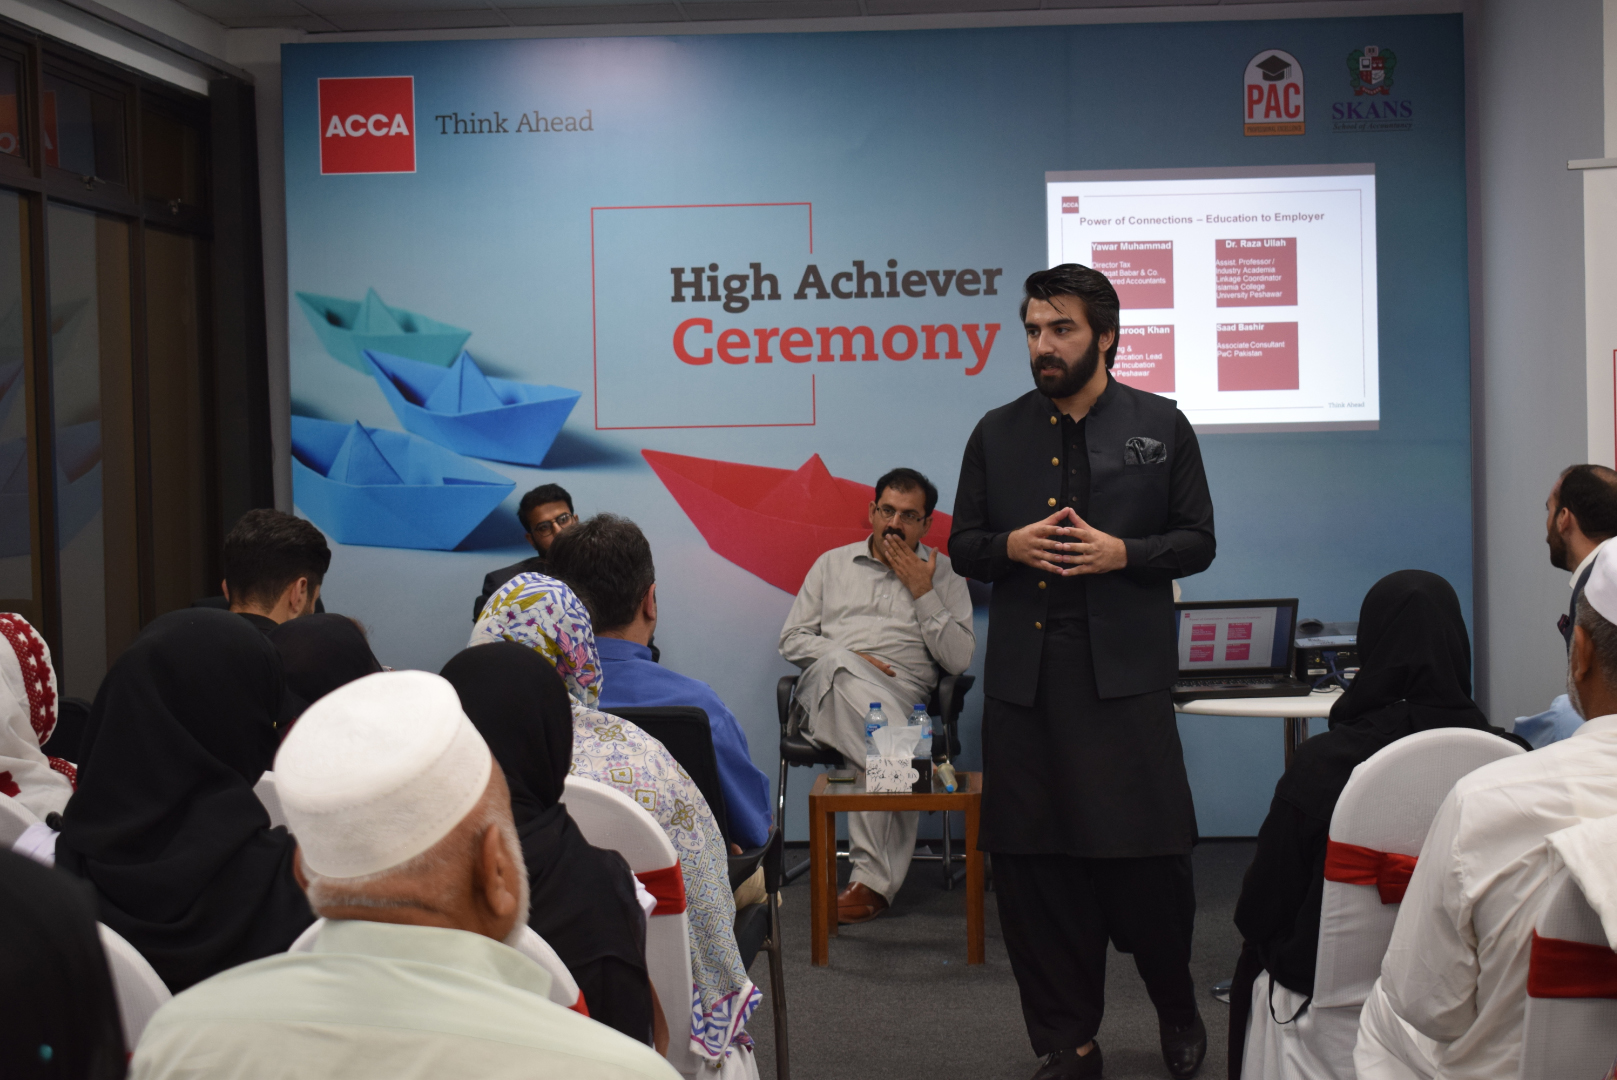 ACCA focuses on building future-ready talent